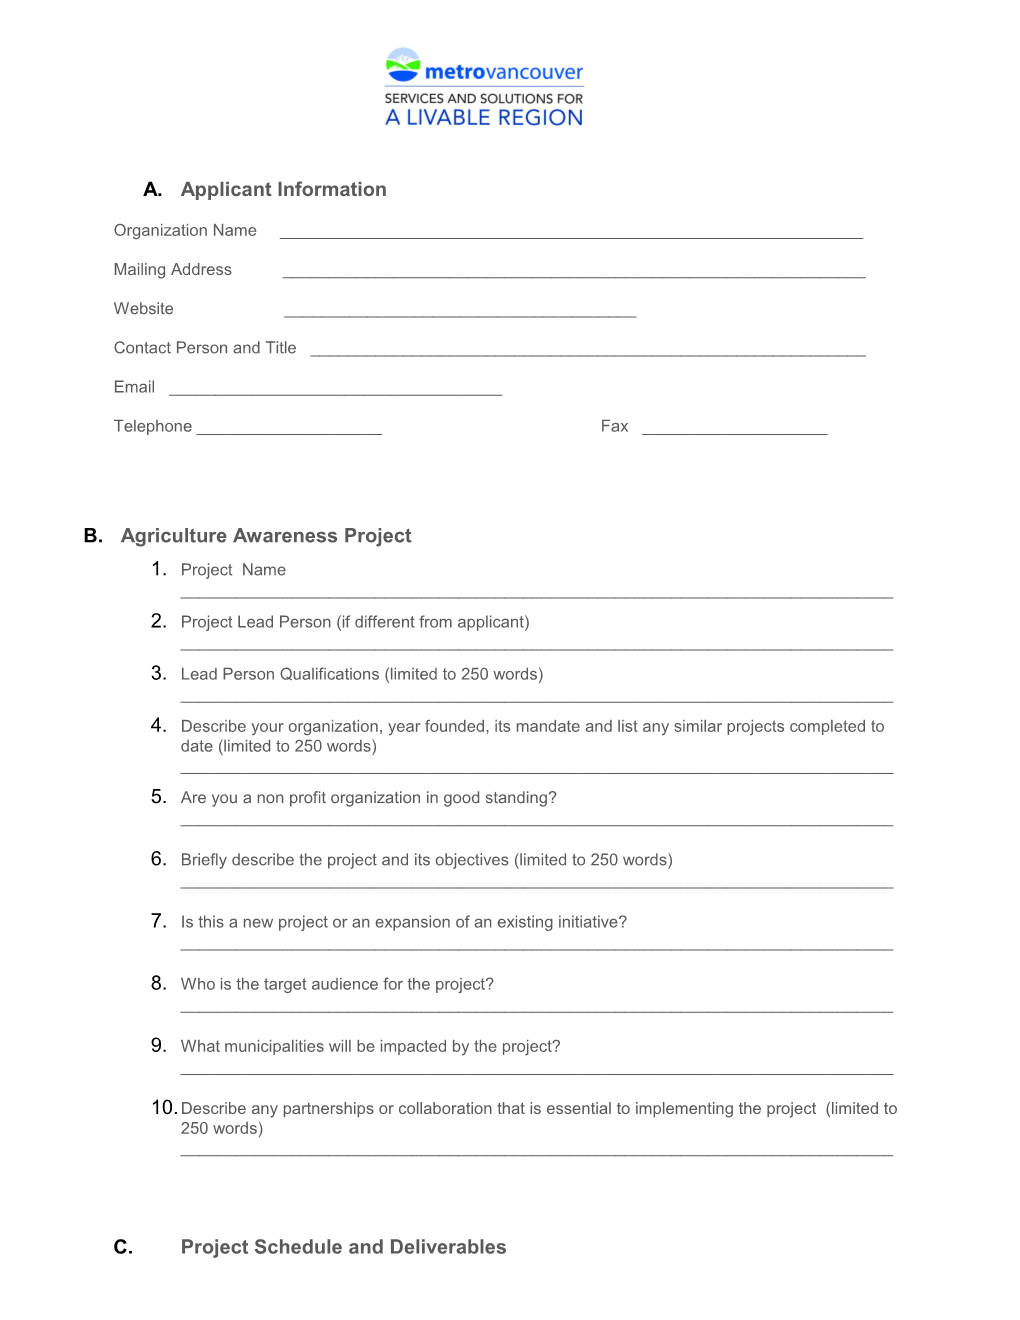 2015 Agriculture Awareness Grant Application Form - Word Version